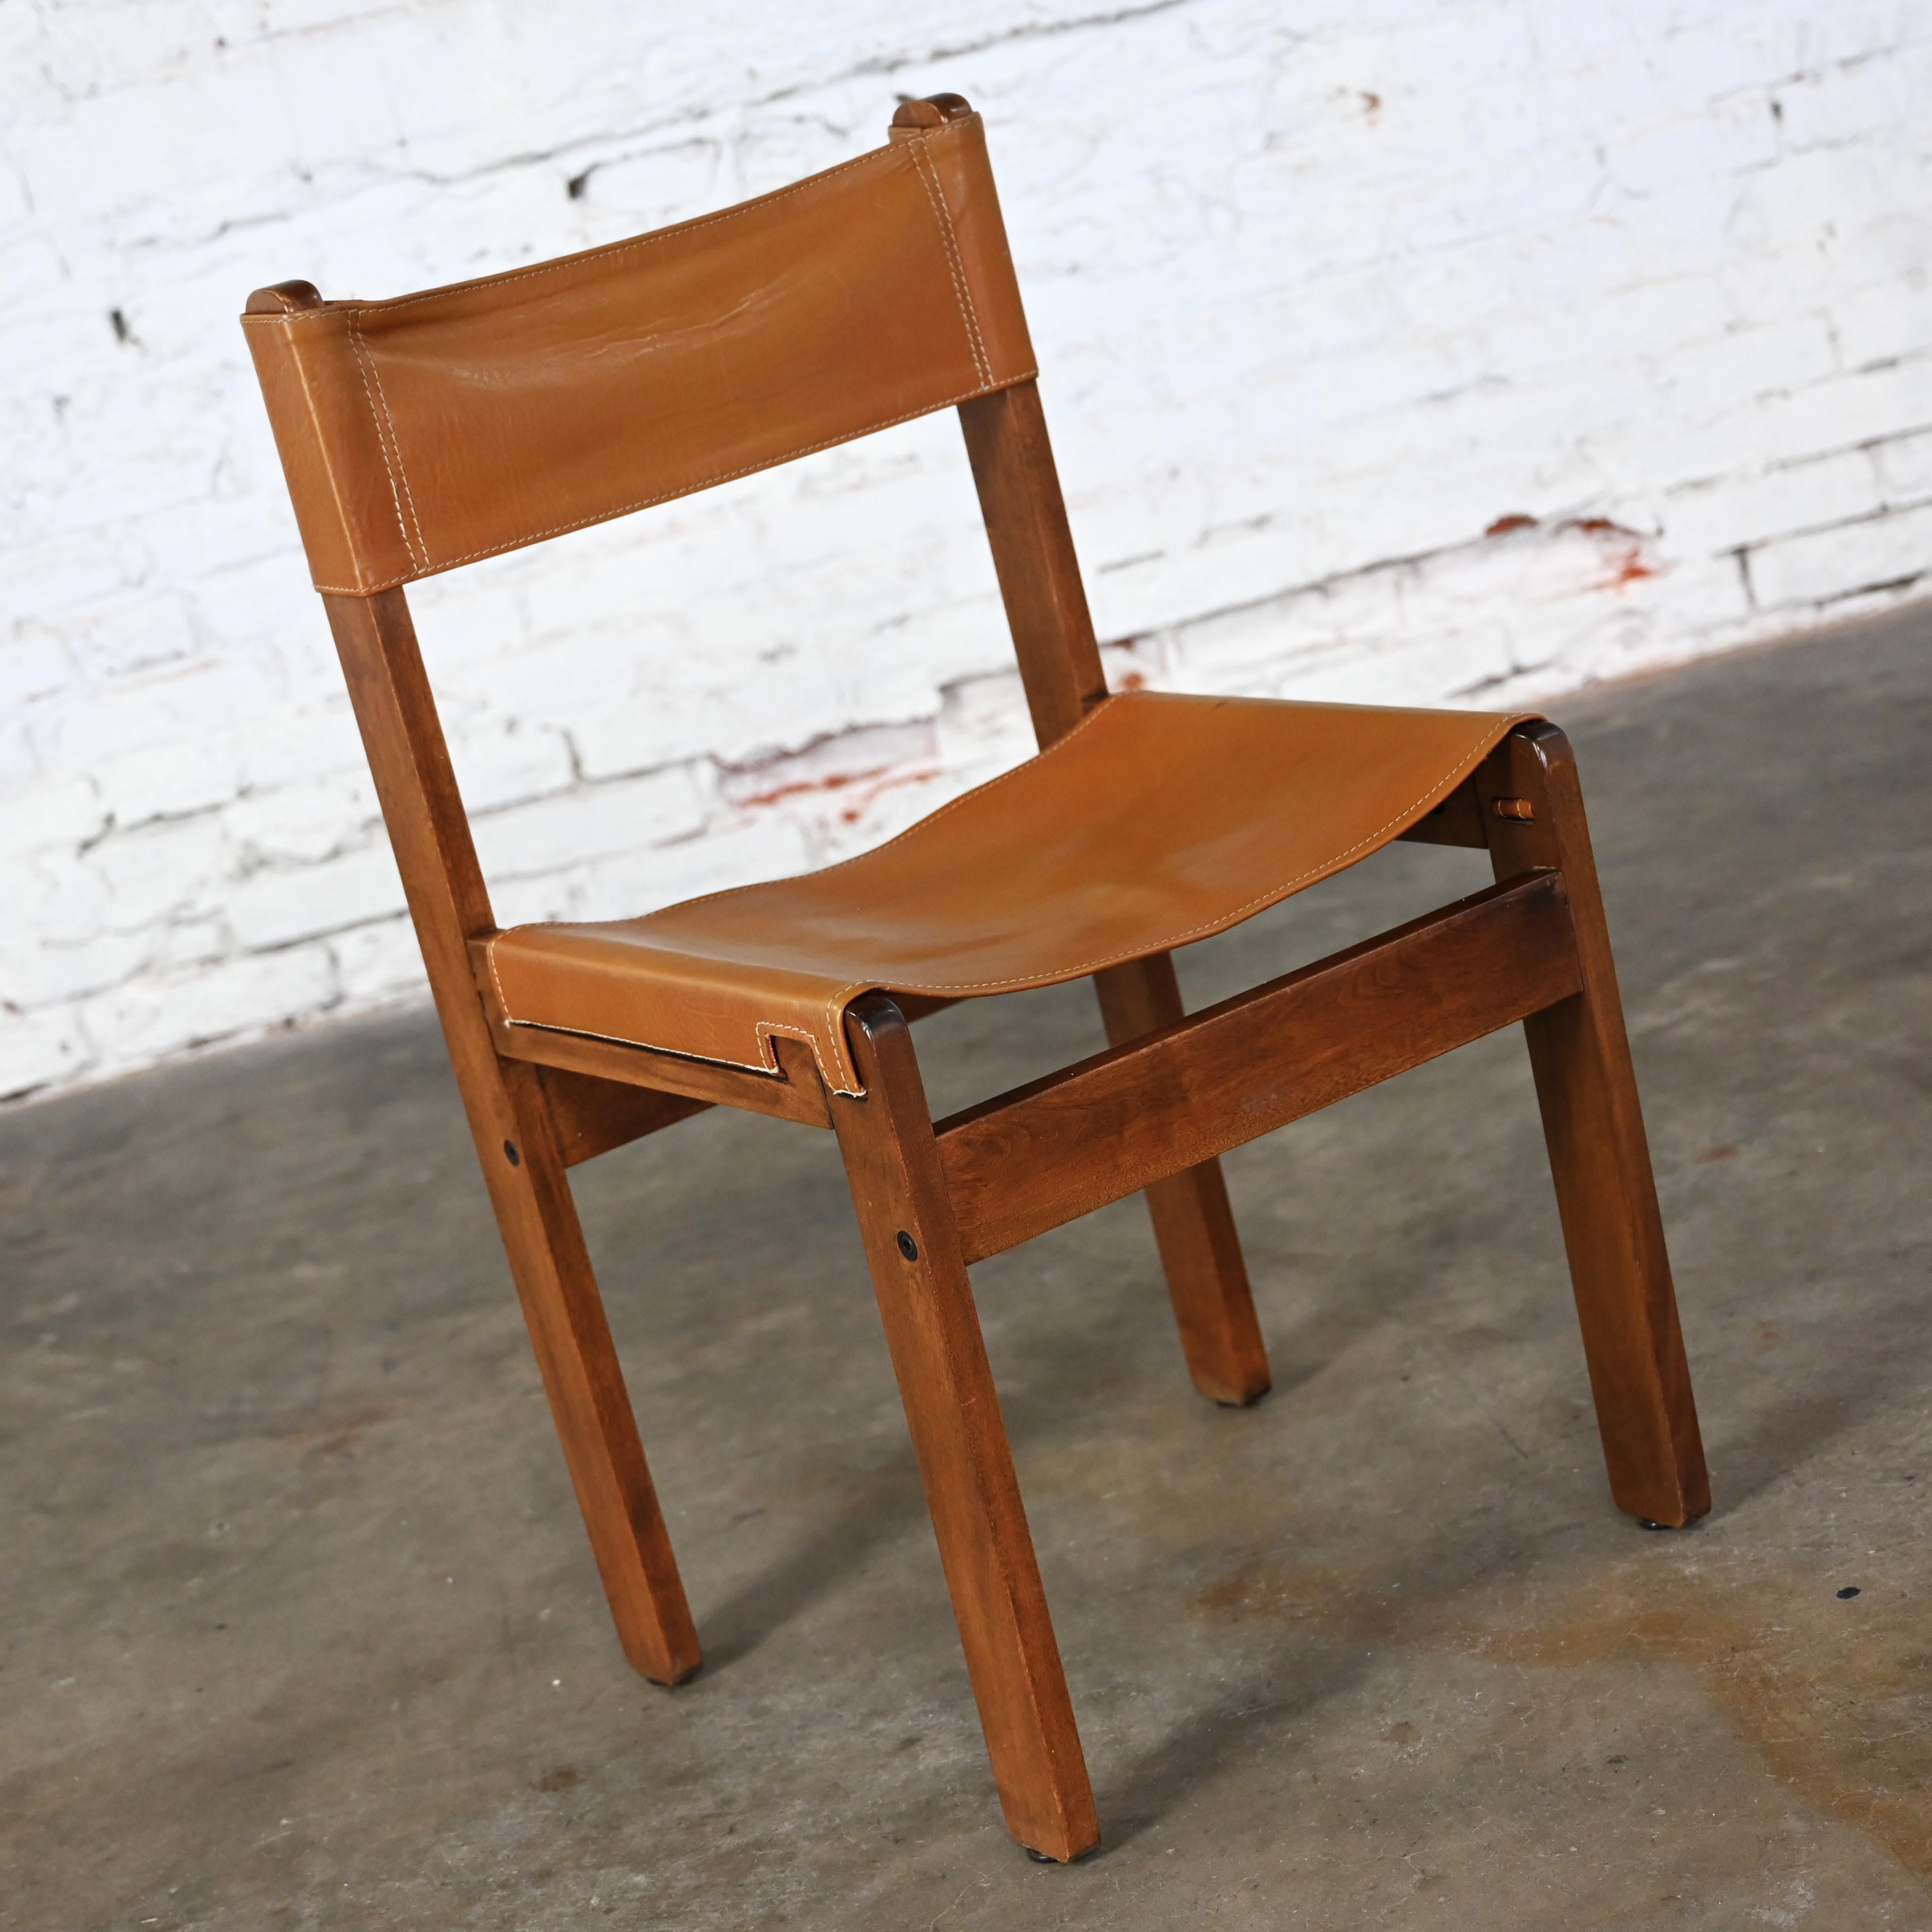 Wonderful vintage Modern side sling chair comprised of teak & cognac leather in the style of Michel Arnoult and made in Argentina. Beautiful condition, keeping in mind that this is vintage and not new so will have signs of use and wear. Please see